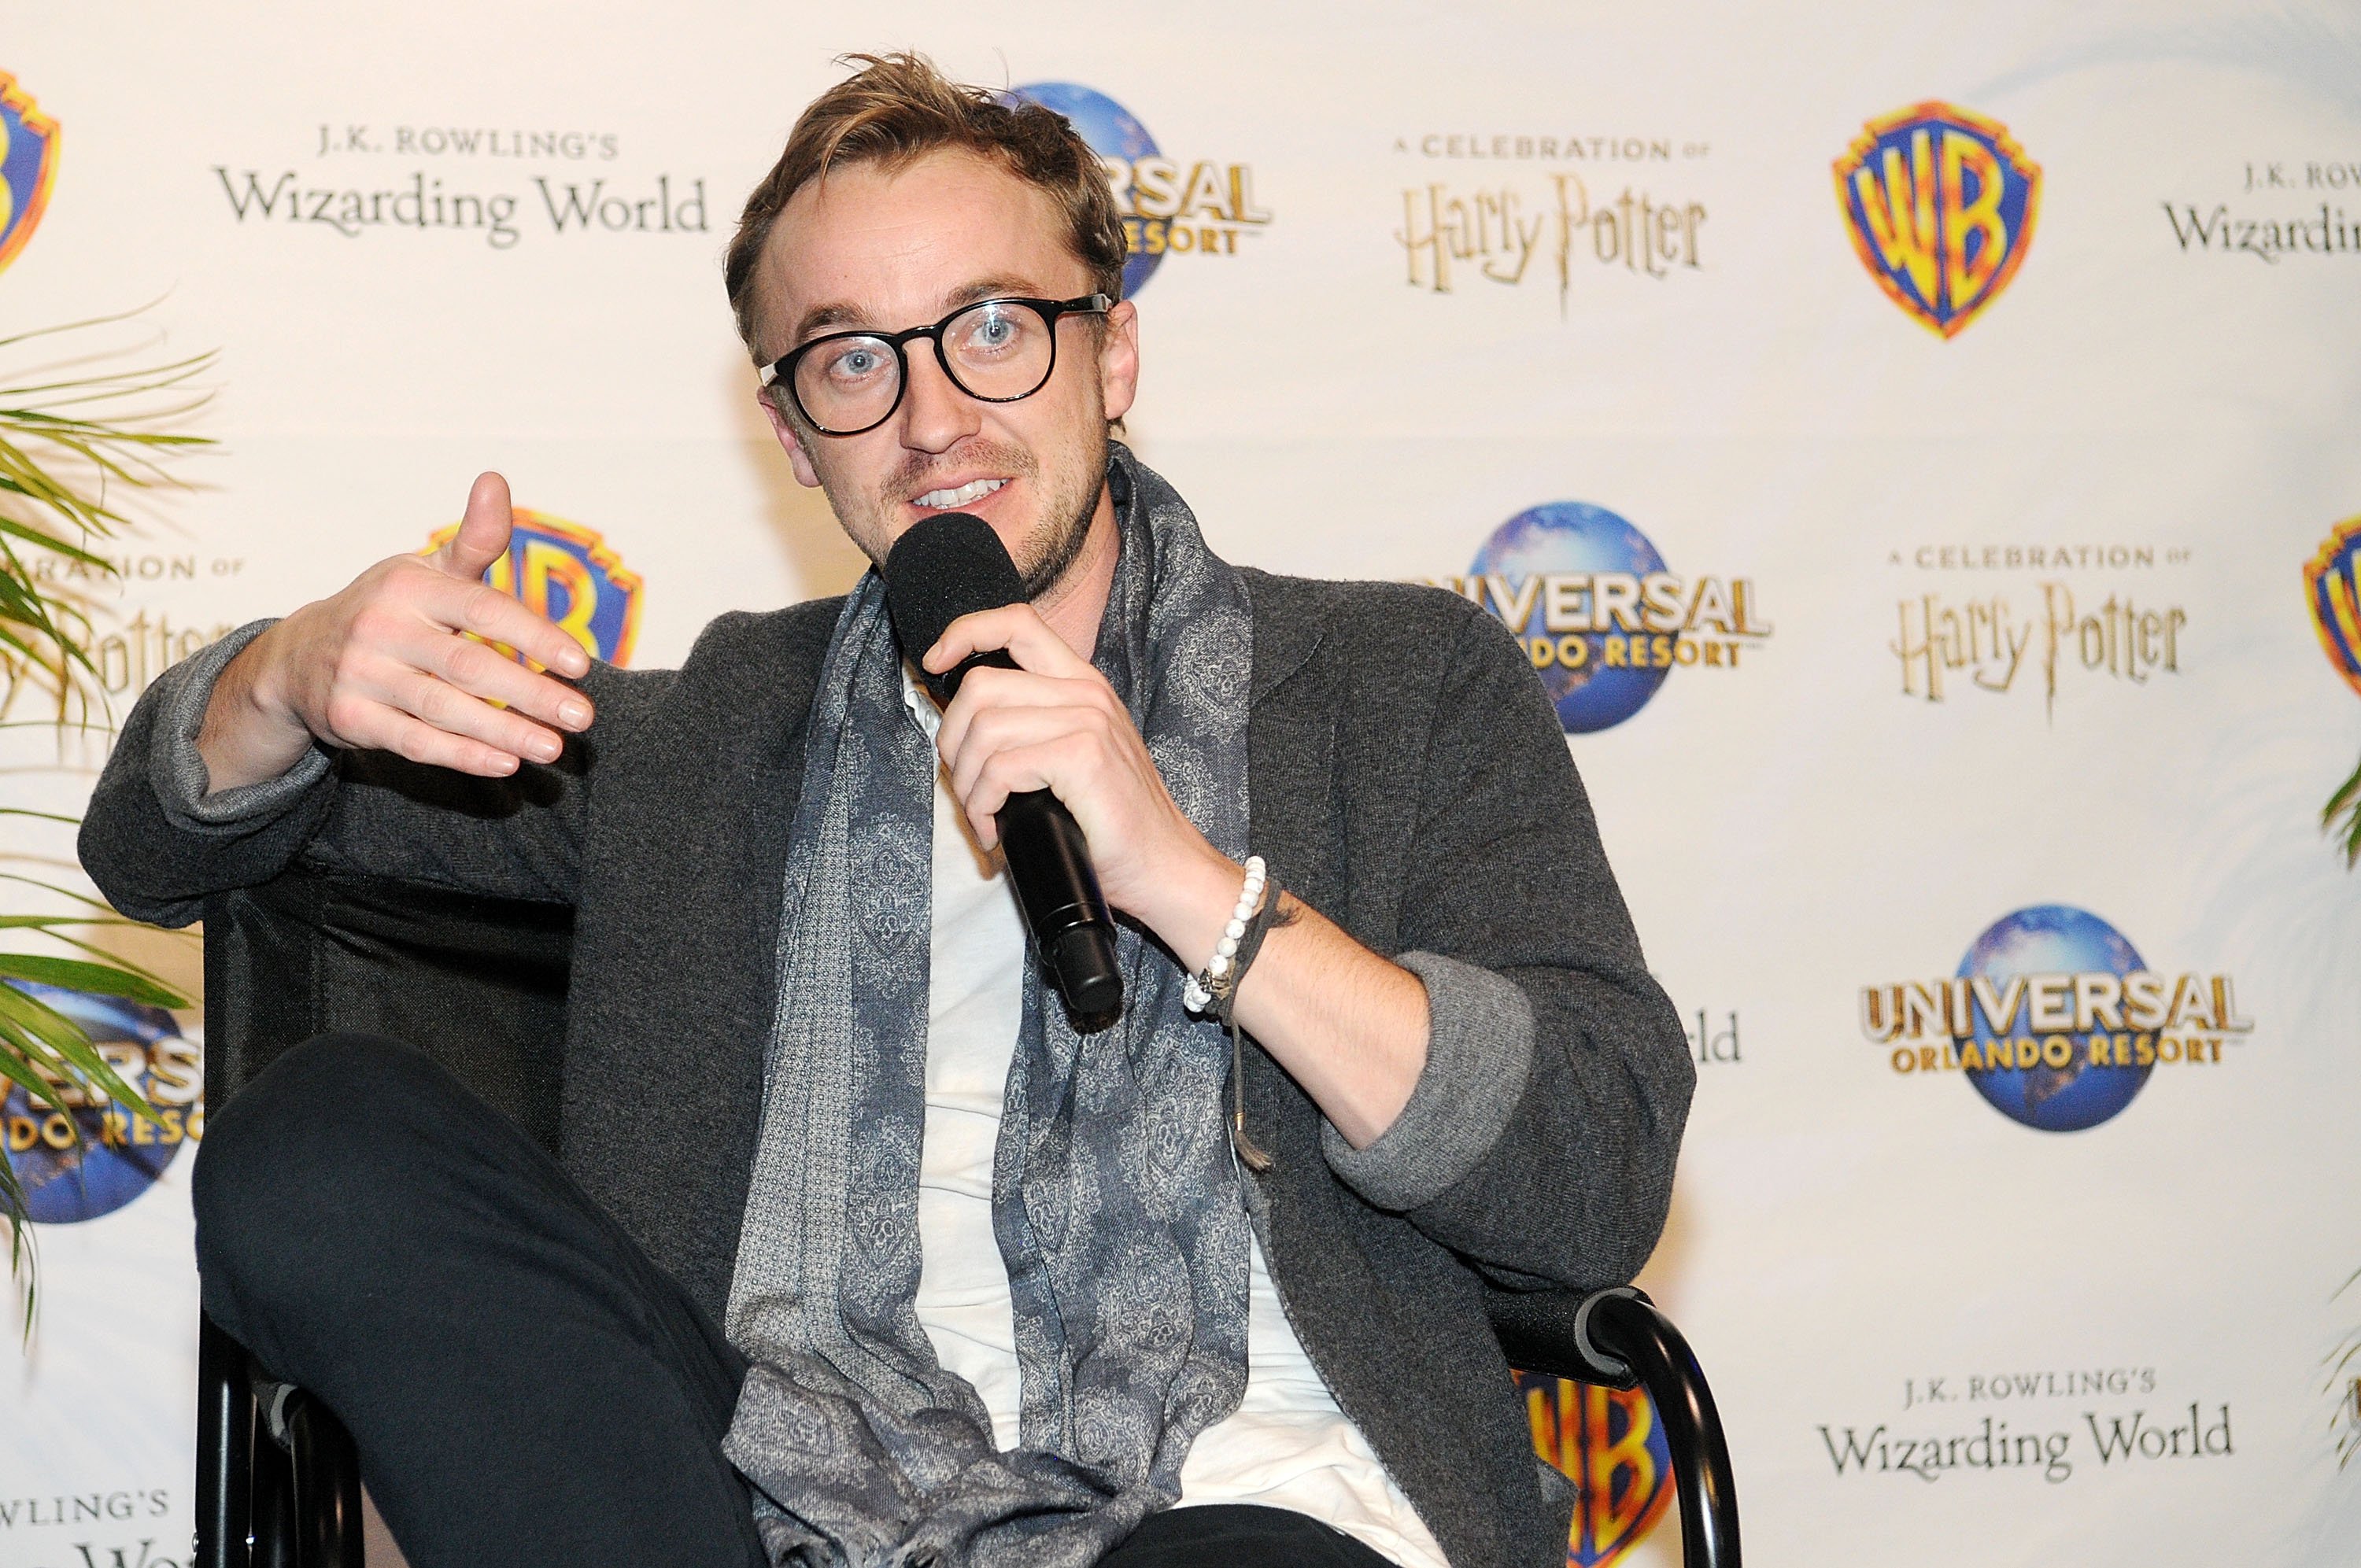 Actor Tom Felton, who plays Draco Malfoy in the Harry Potter movies, attends A Celebration of Harry Potter at Universal Orlando